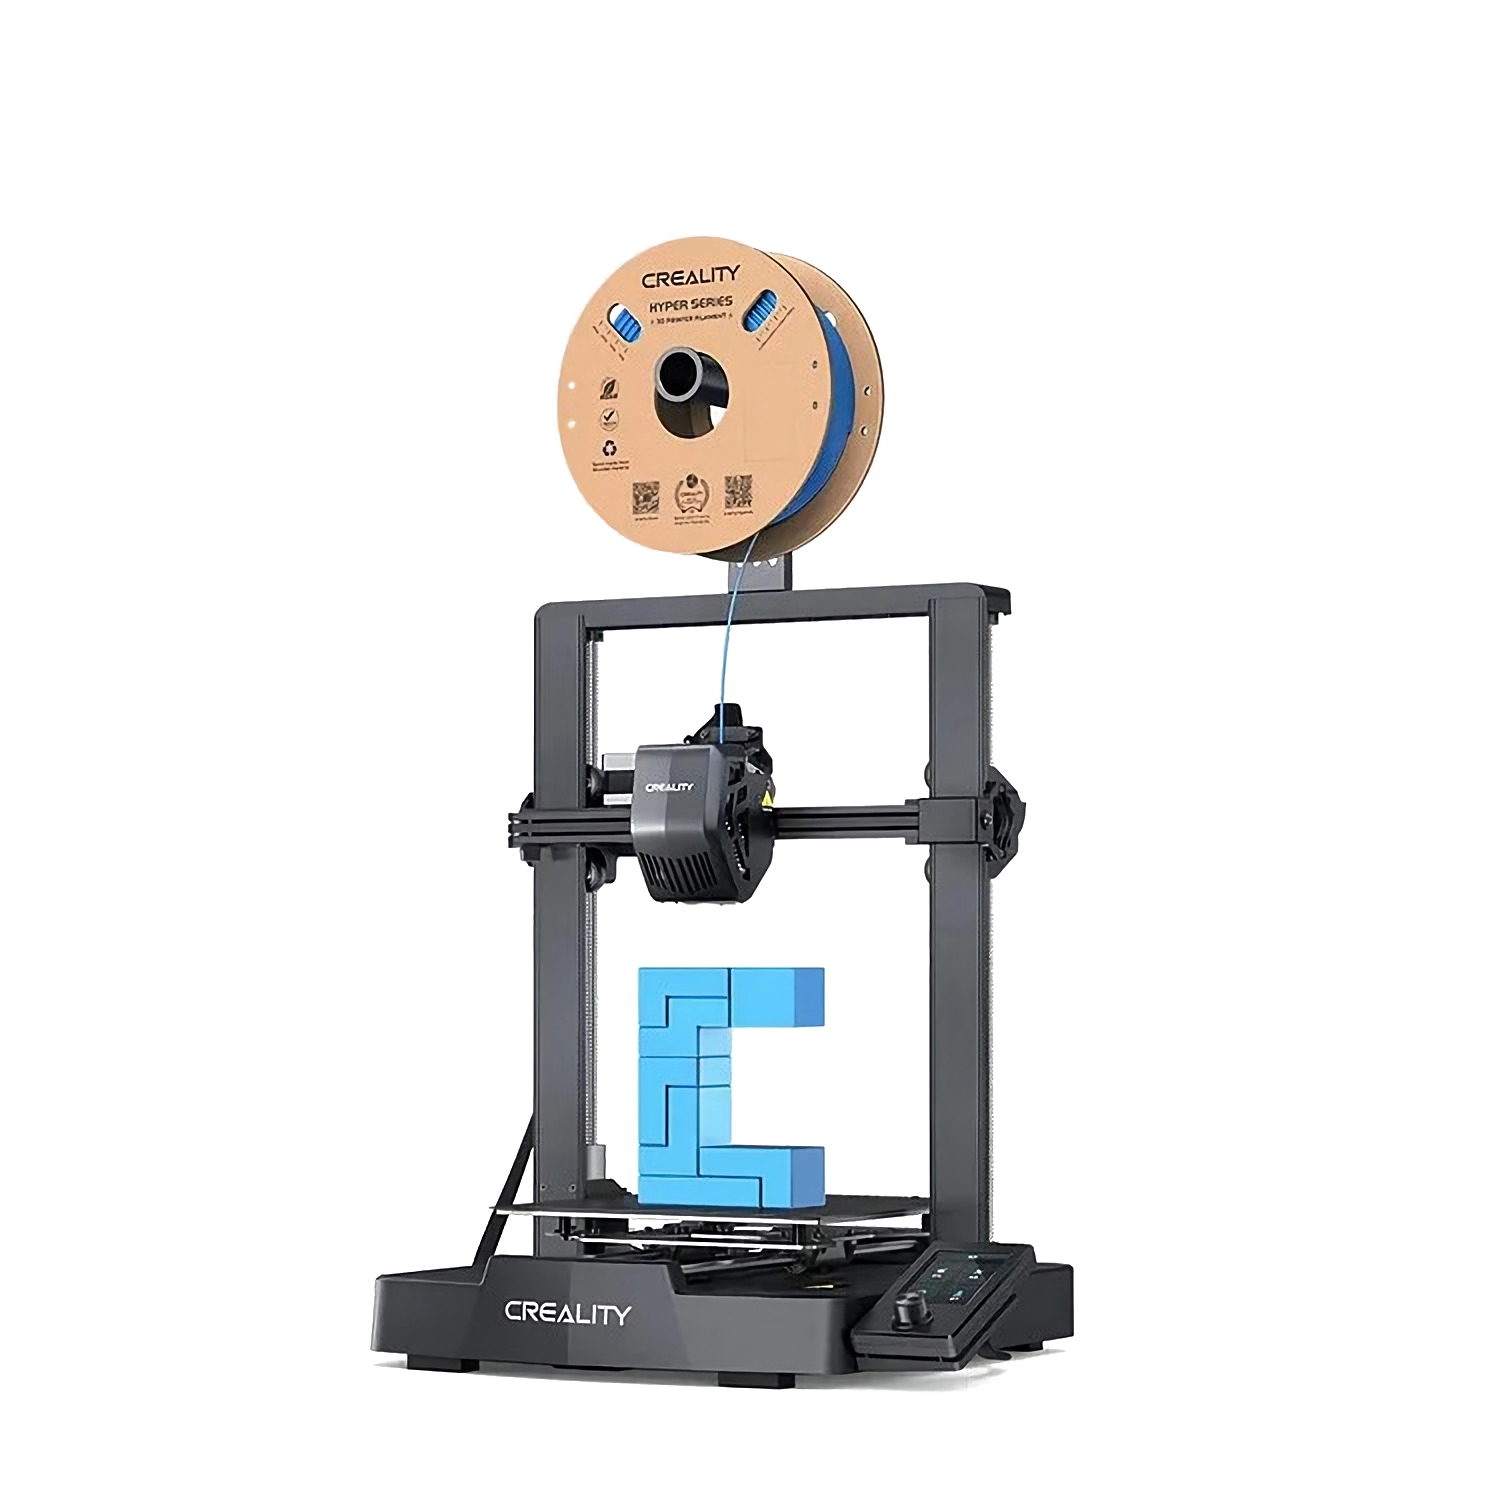 Creality Ender-3 V3 SE 3D Printer with Auto Leveling and Filament Printing